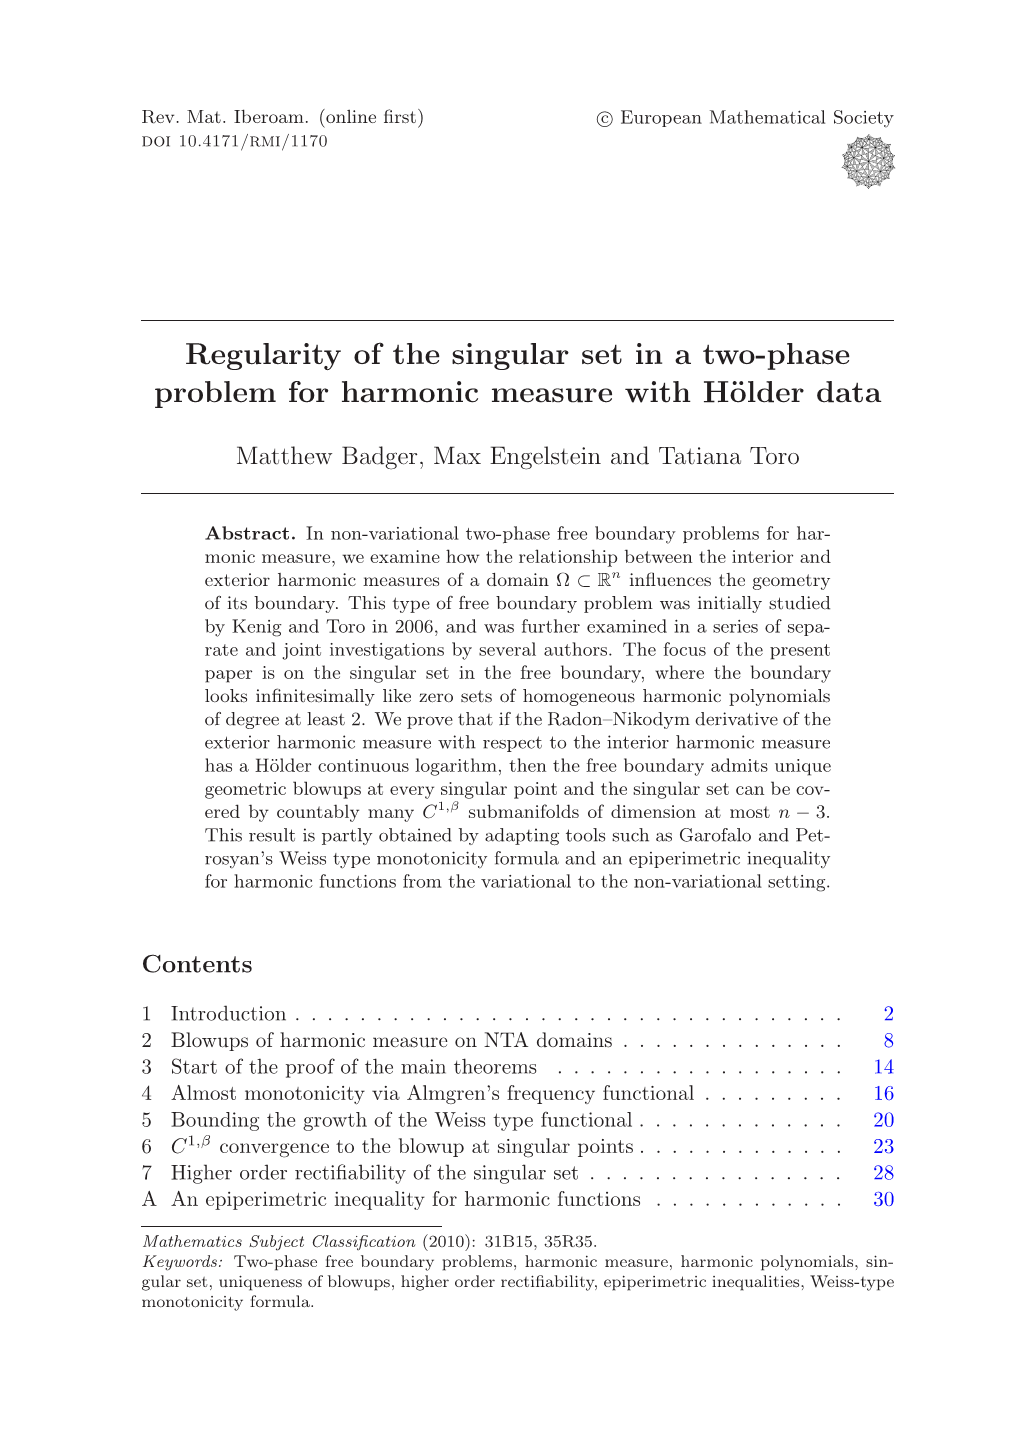 Regularity of the Singular Set in a Two-Phase Problem for Harmonic Measure with H¨Older Data